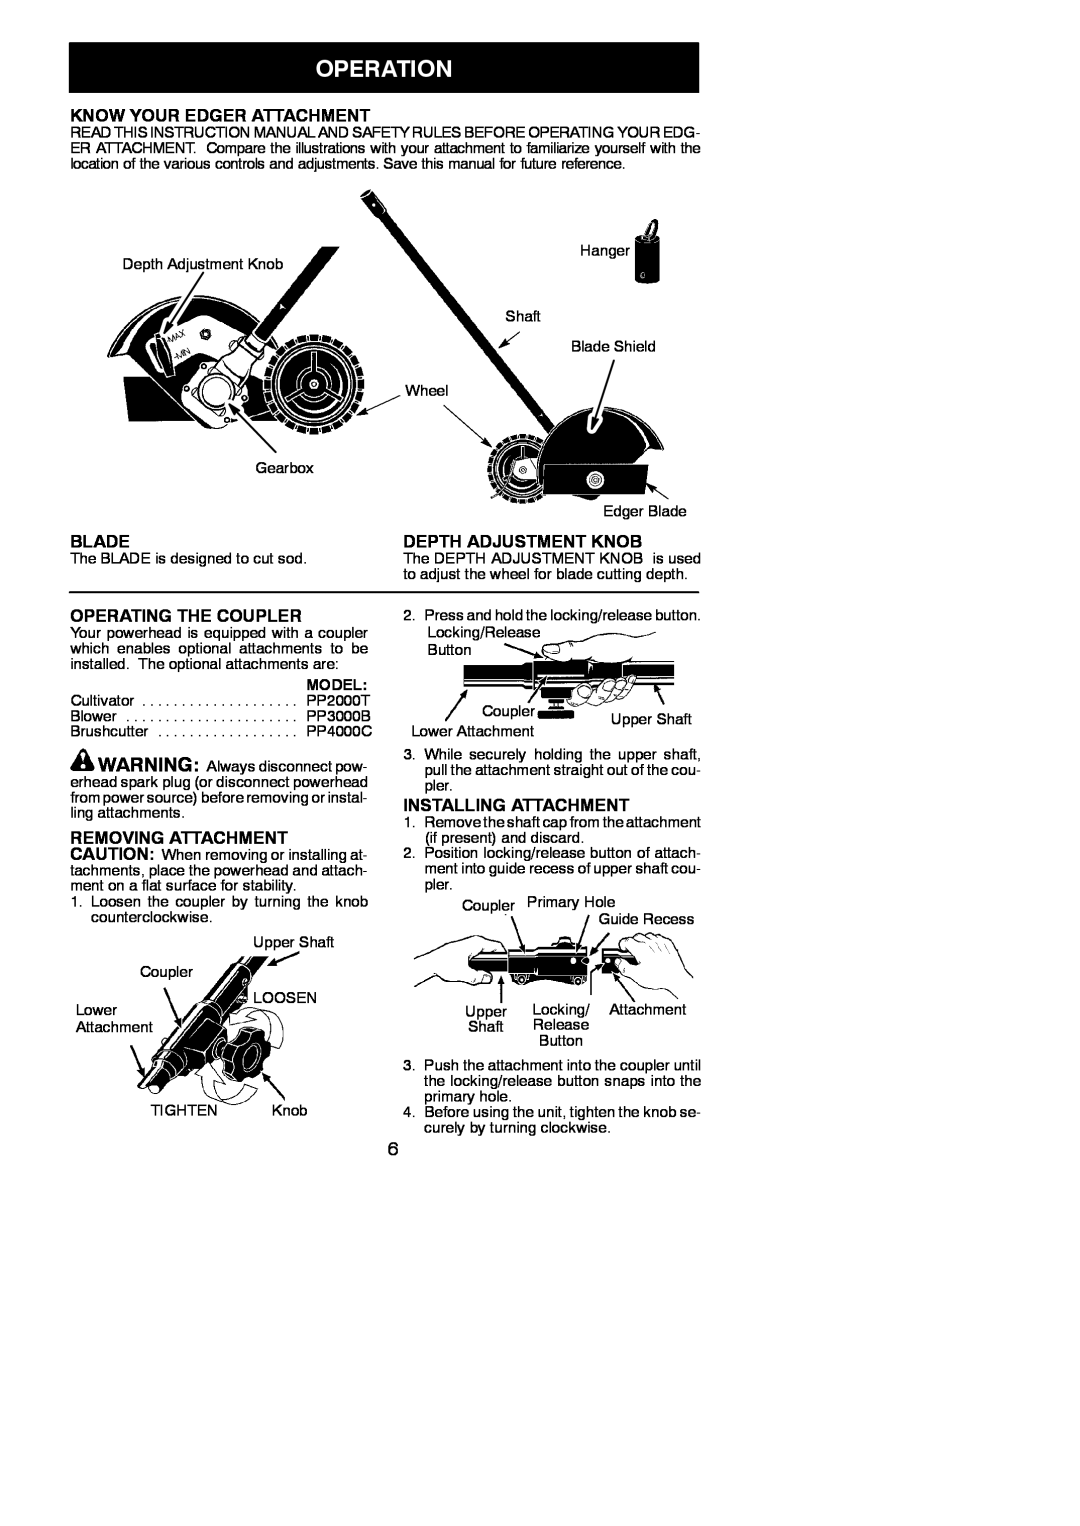 Poulan 530164833 Operation, Know Your Edger Attachment, Blade, Depth Adjustment Knob, Operating The Coupler 